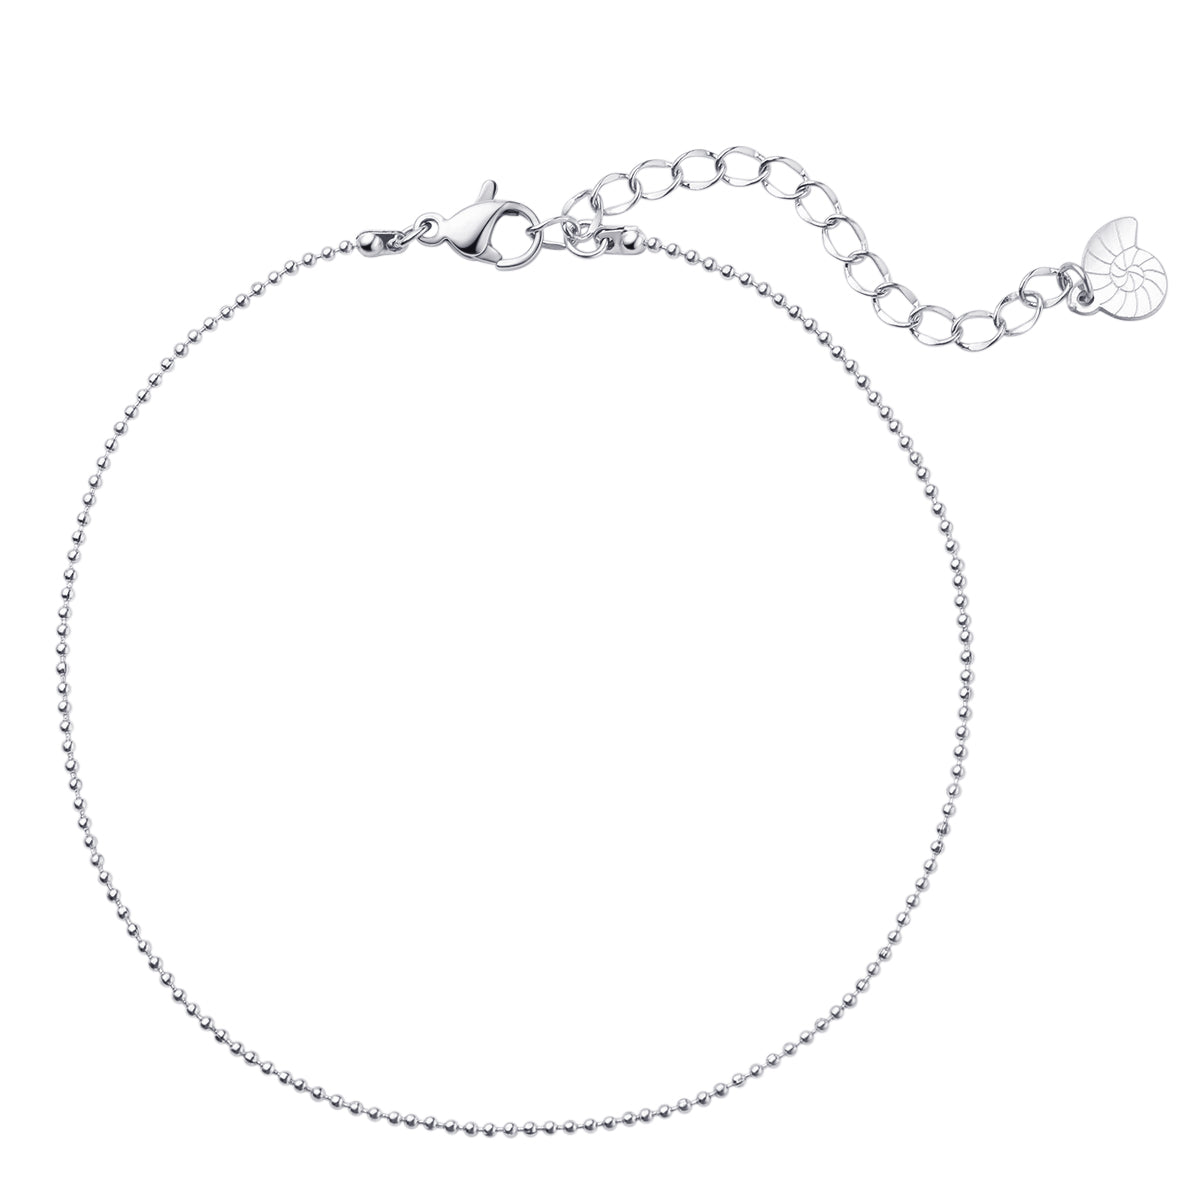 Bead Chain Anklet Silver